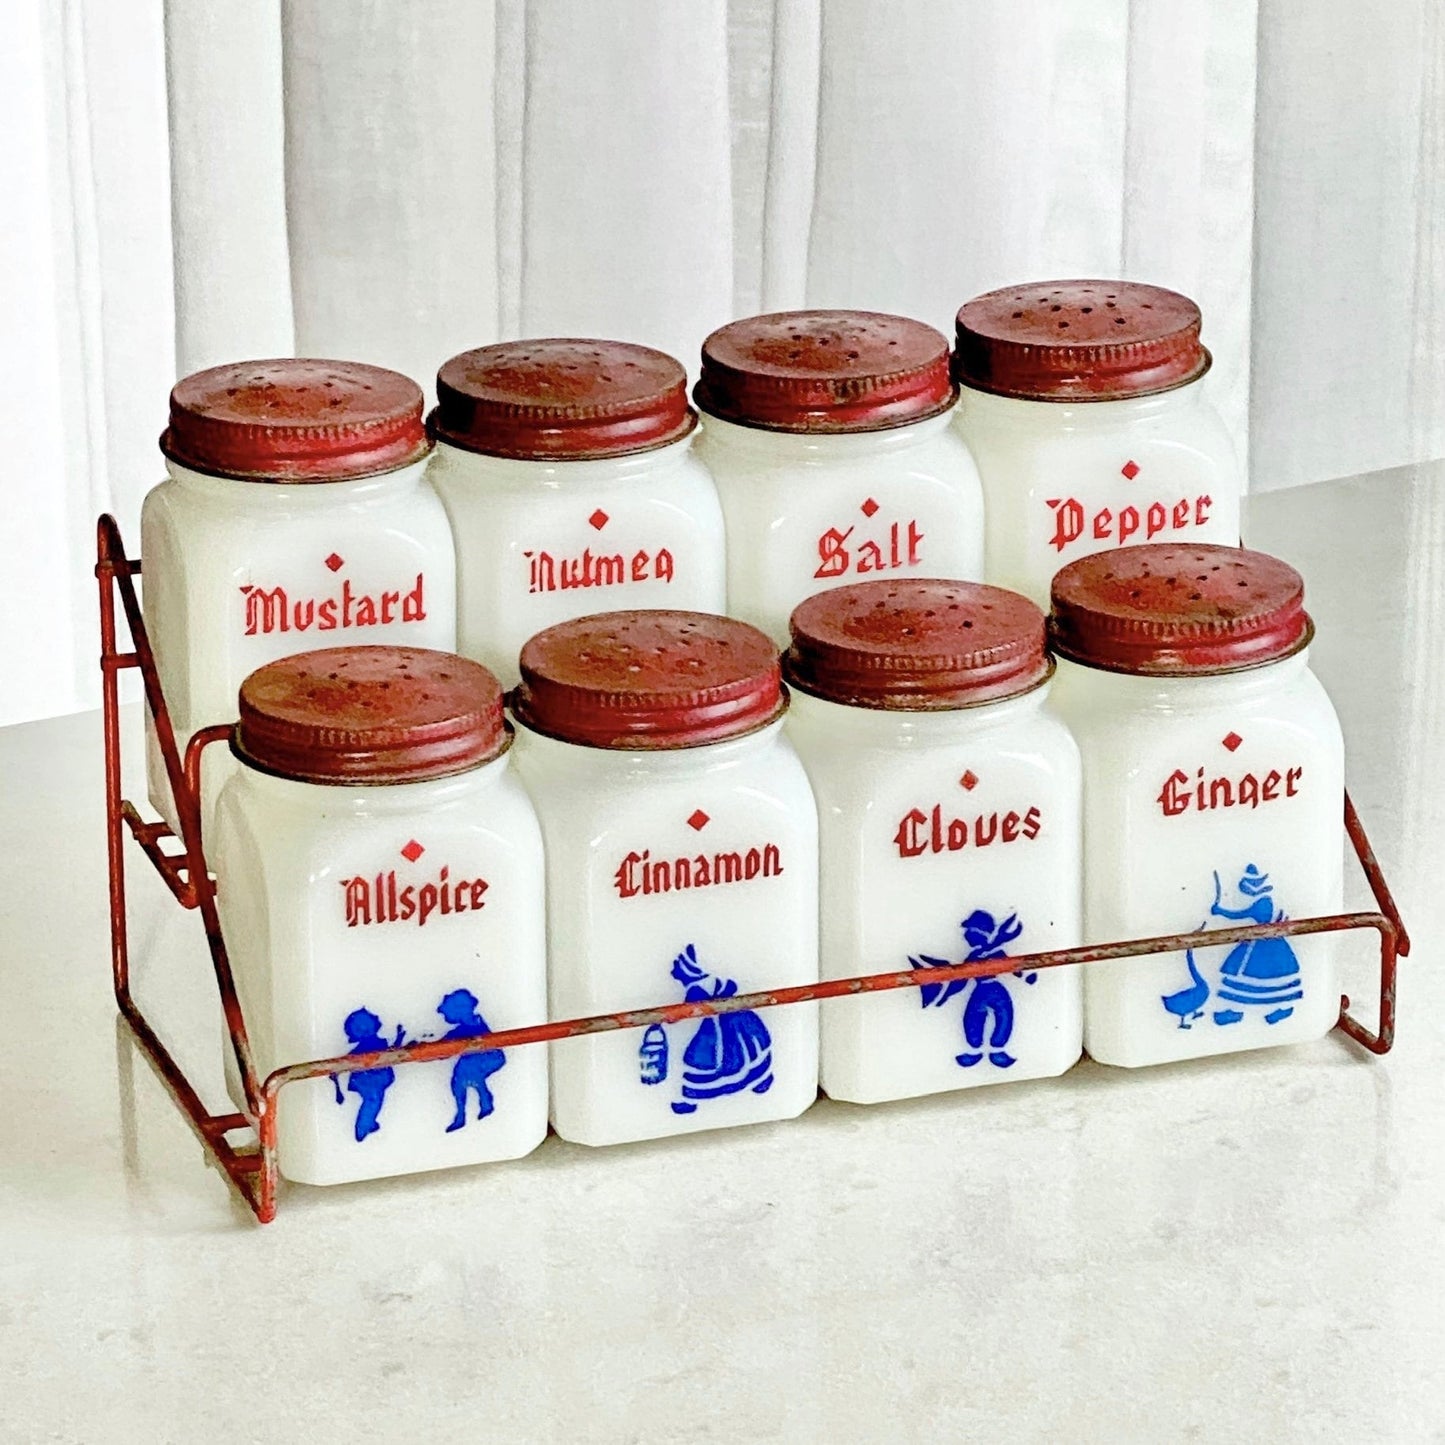 Vintage Dove Spice Jars and Rack made by the Frank Tea & Spice Co. (circa 1930s)